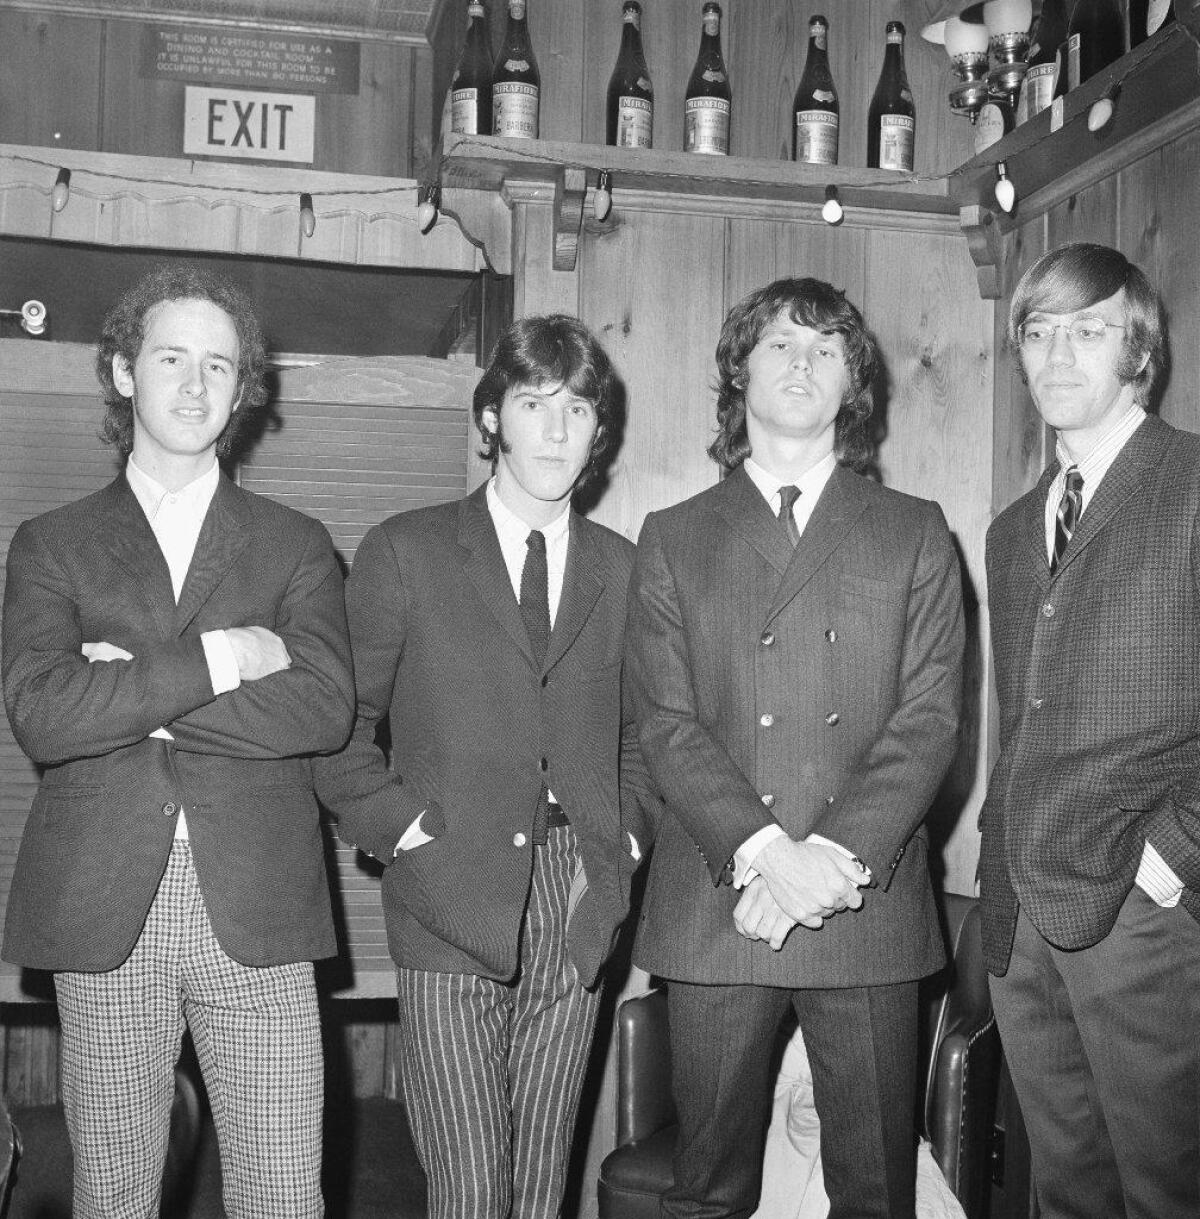 The Doors at the Whisky a Go Go in 1966.